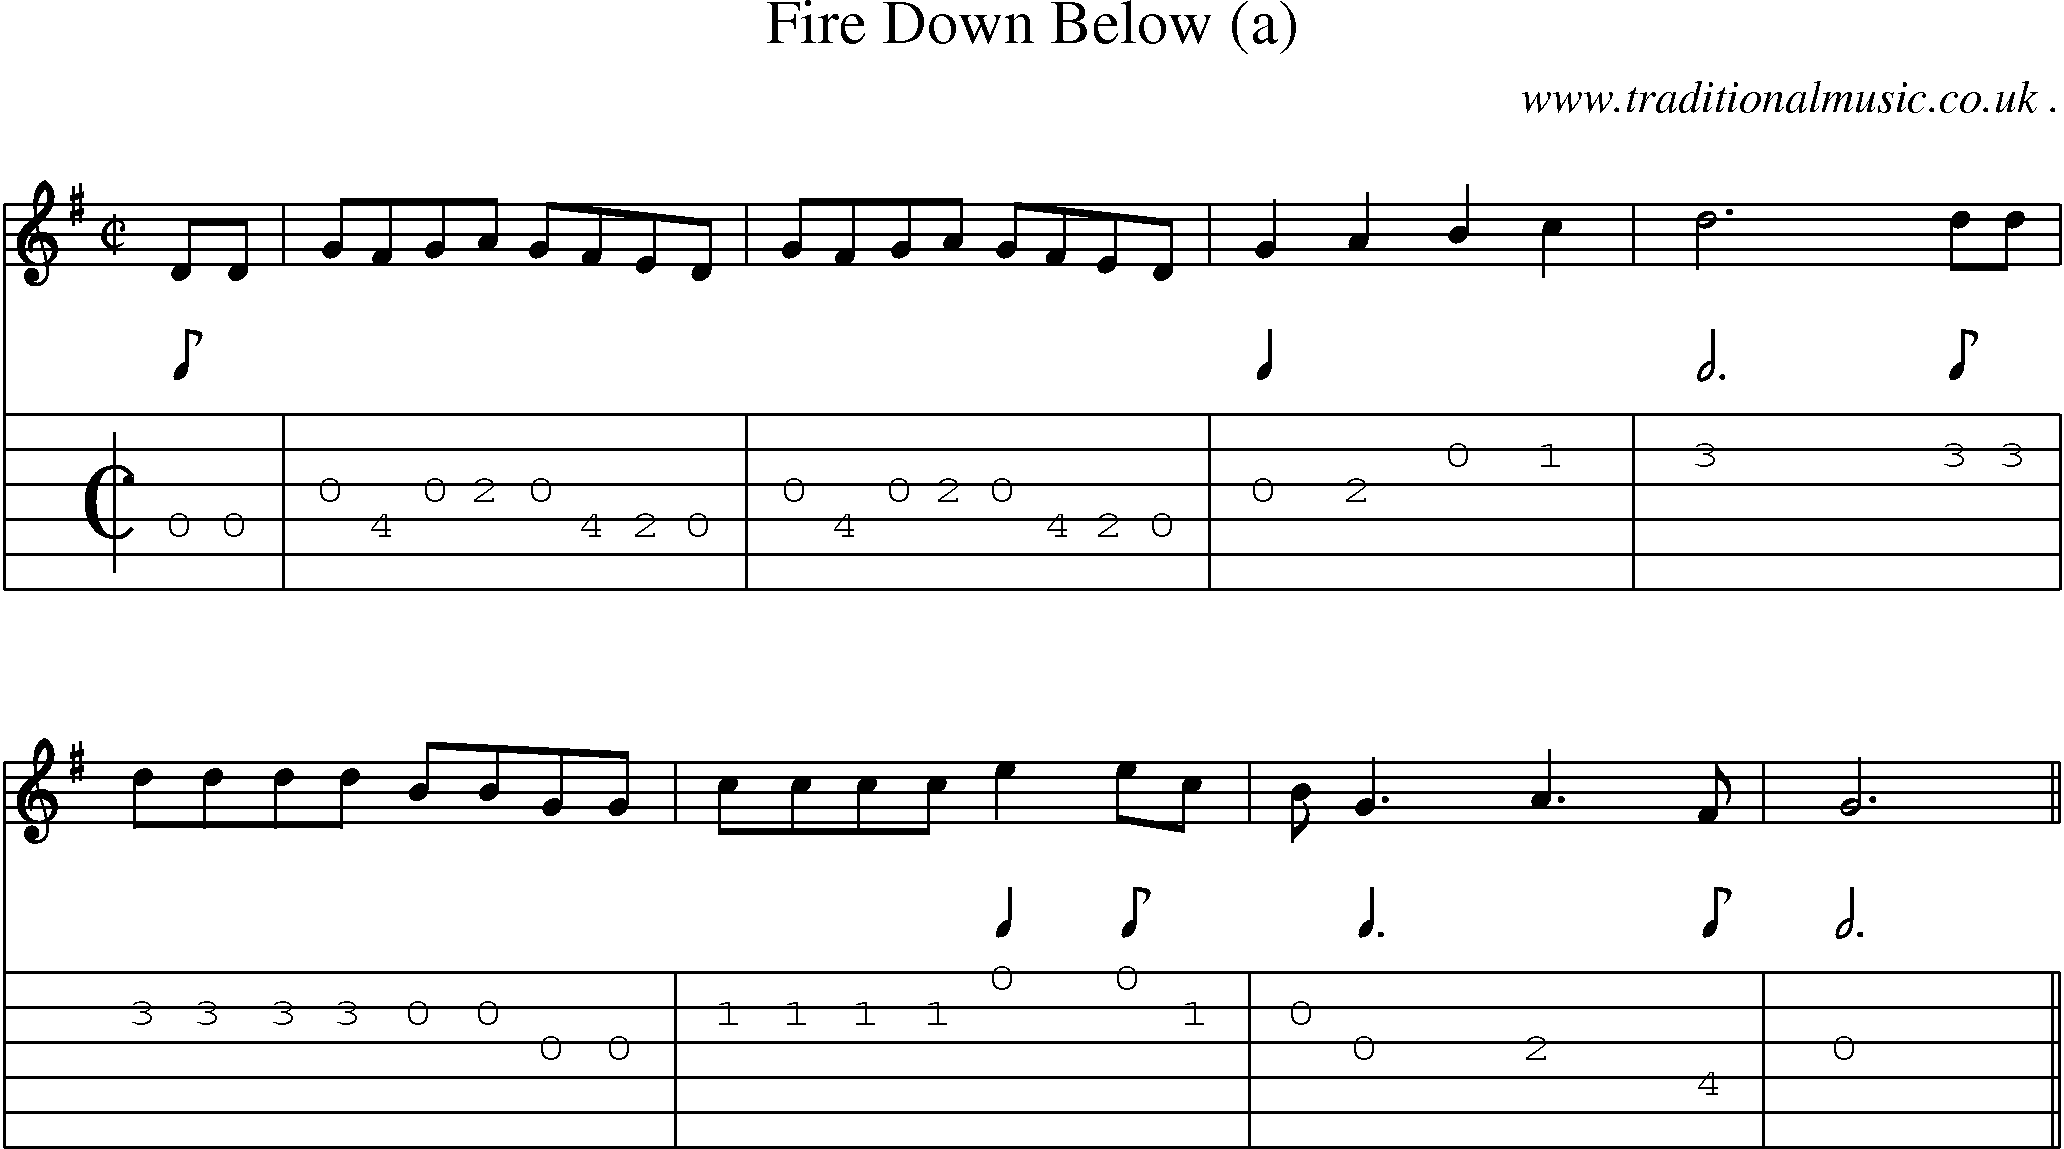 Sheet-Music and Guitar Tabs for Fire Down Below (a)